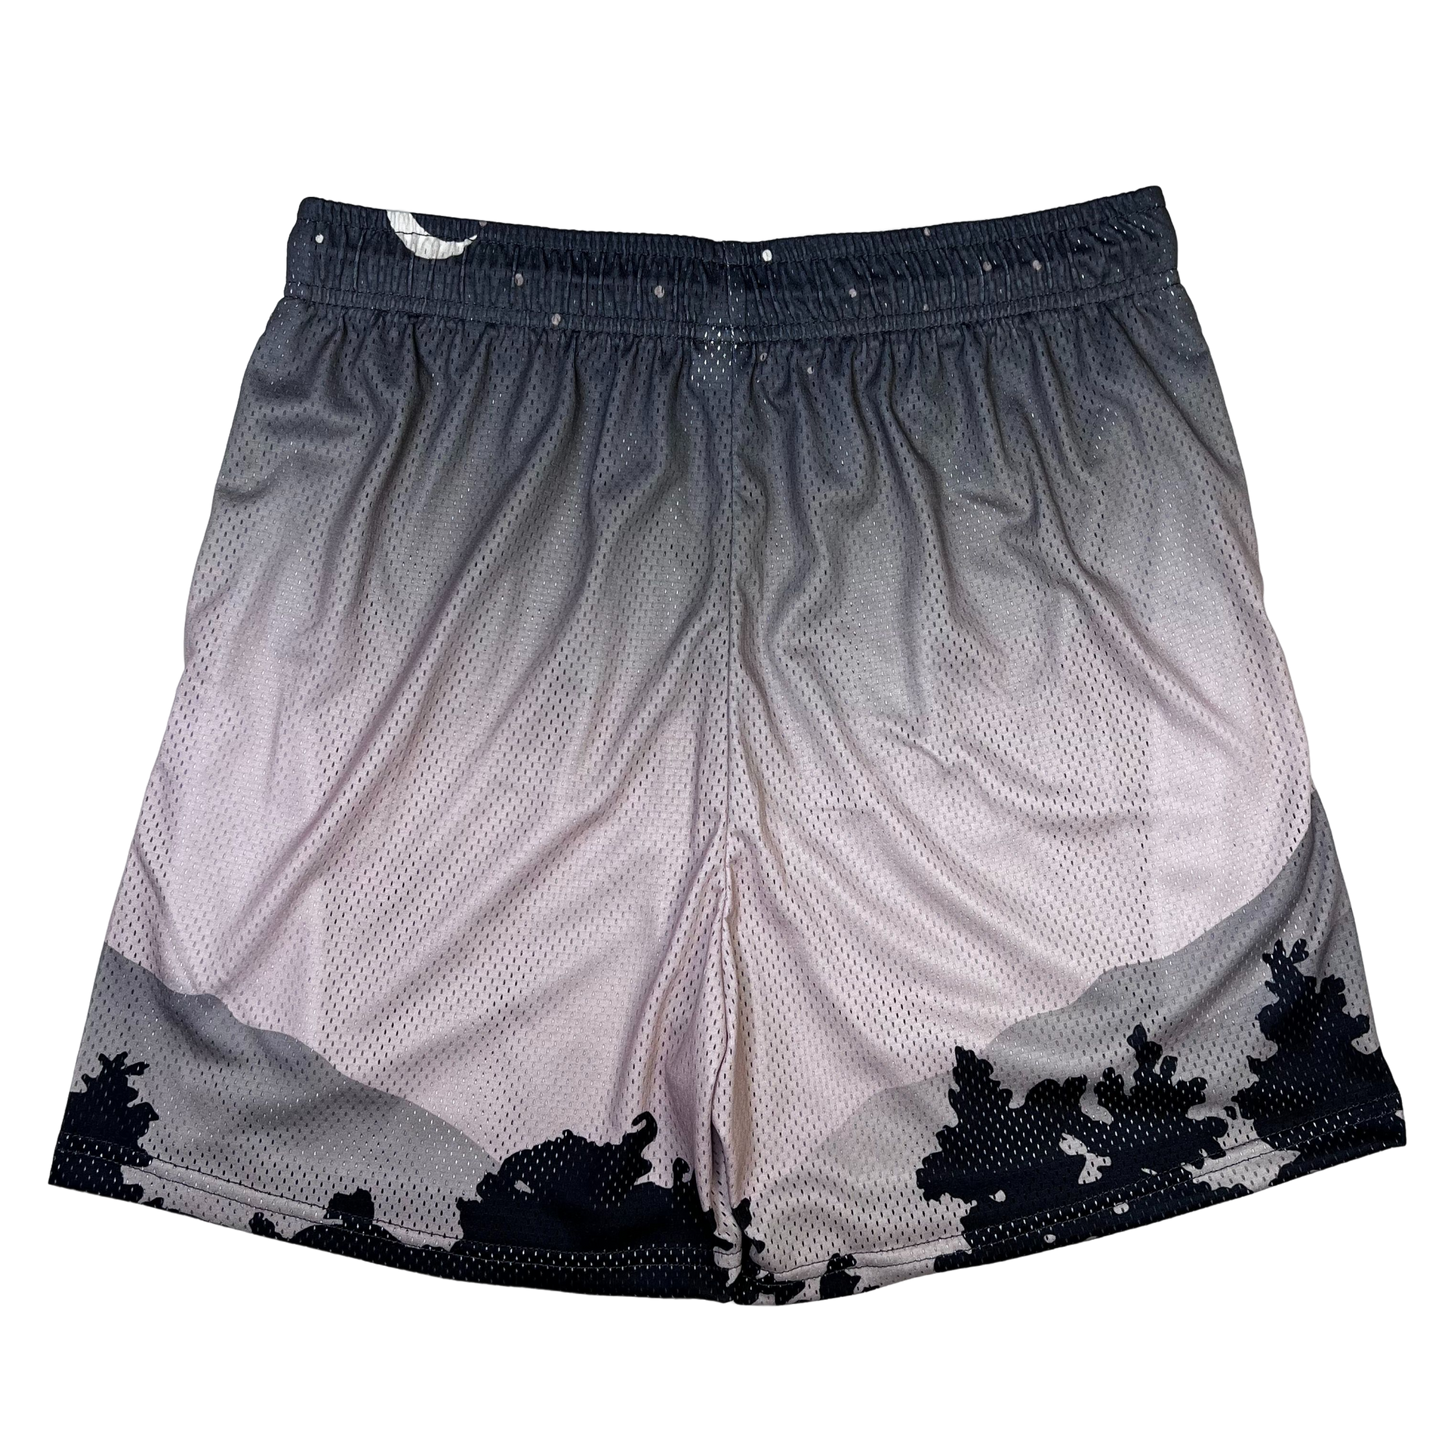 GZ Miami South Shore✥𝔾𝕣𝕠𝕦𝕟𝕕ℤ𝕖𝕣𝕠®✥2023 Southern suit boss/GZ American casual neutral sports outdoor Yamashita Fuji four-point shorts and ball pants 